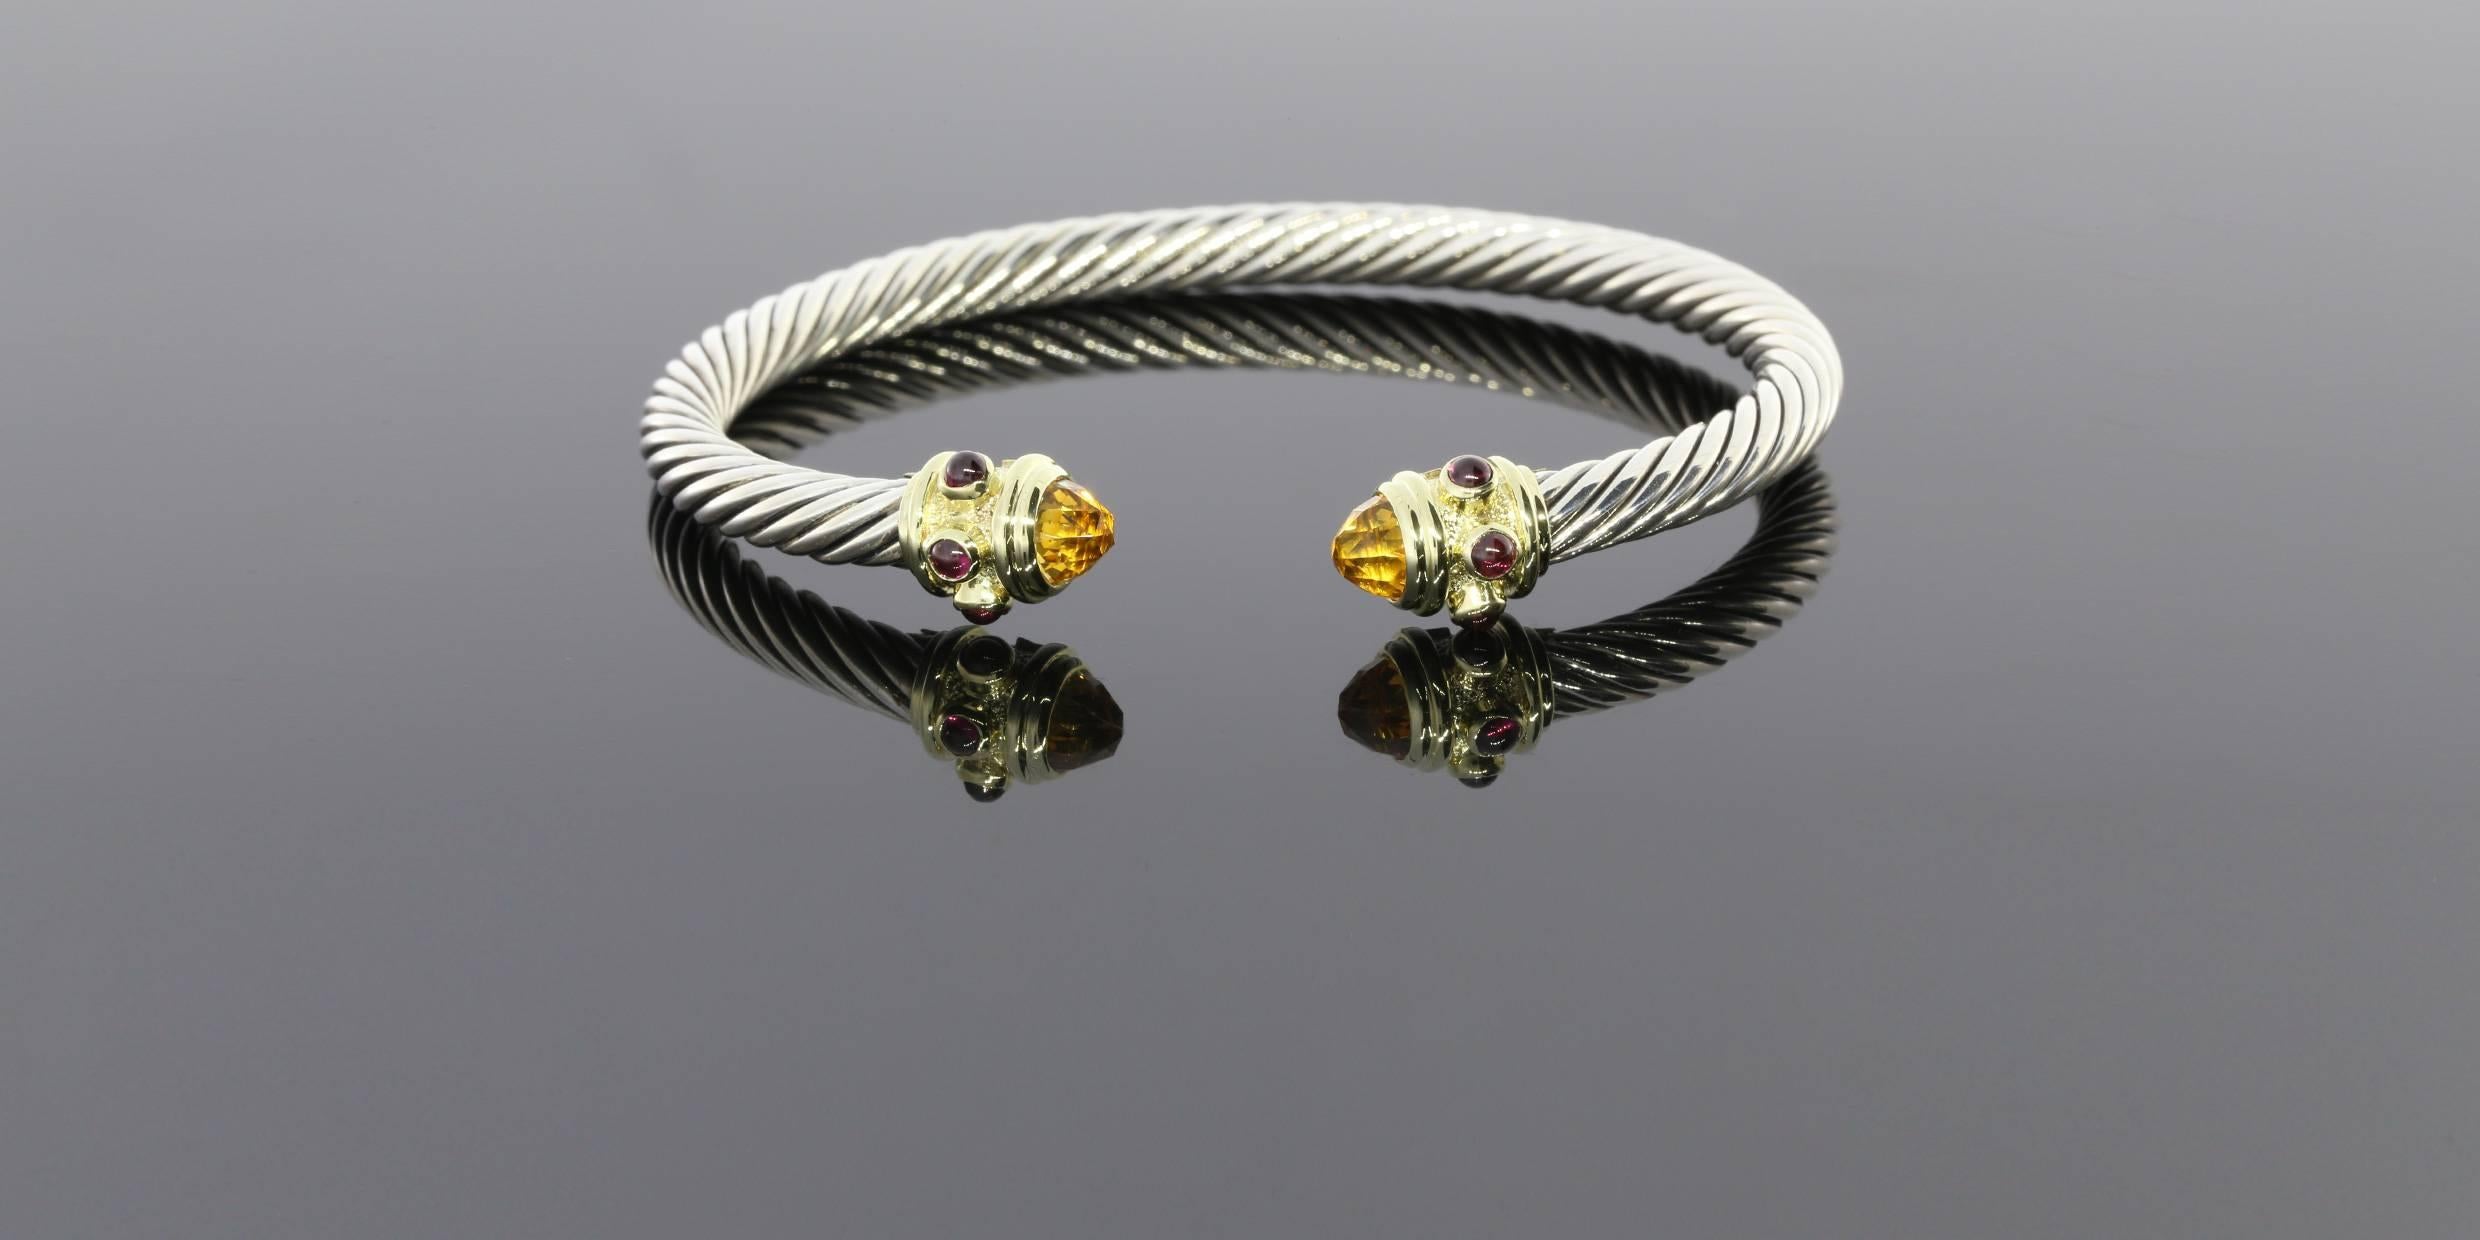 David Yurman's Renaissance Collection merges classical, sculptural forms with brilliant jewel tones for an iconic design & a signature motif. This beautiful Renaissance Collection bracelet is 5mm in width and has faceted citrine end caps that are